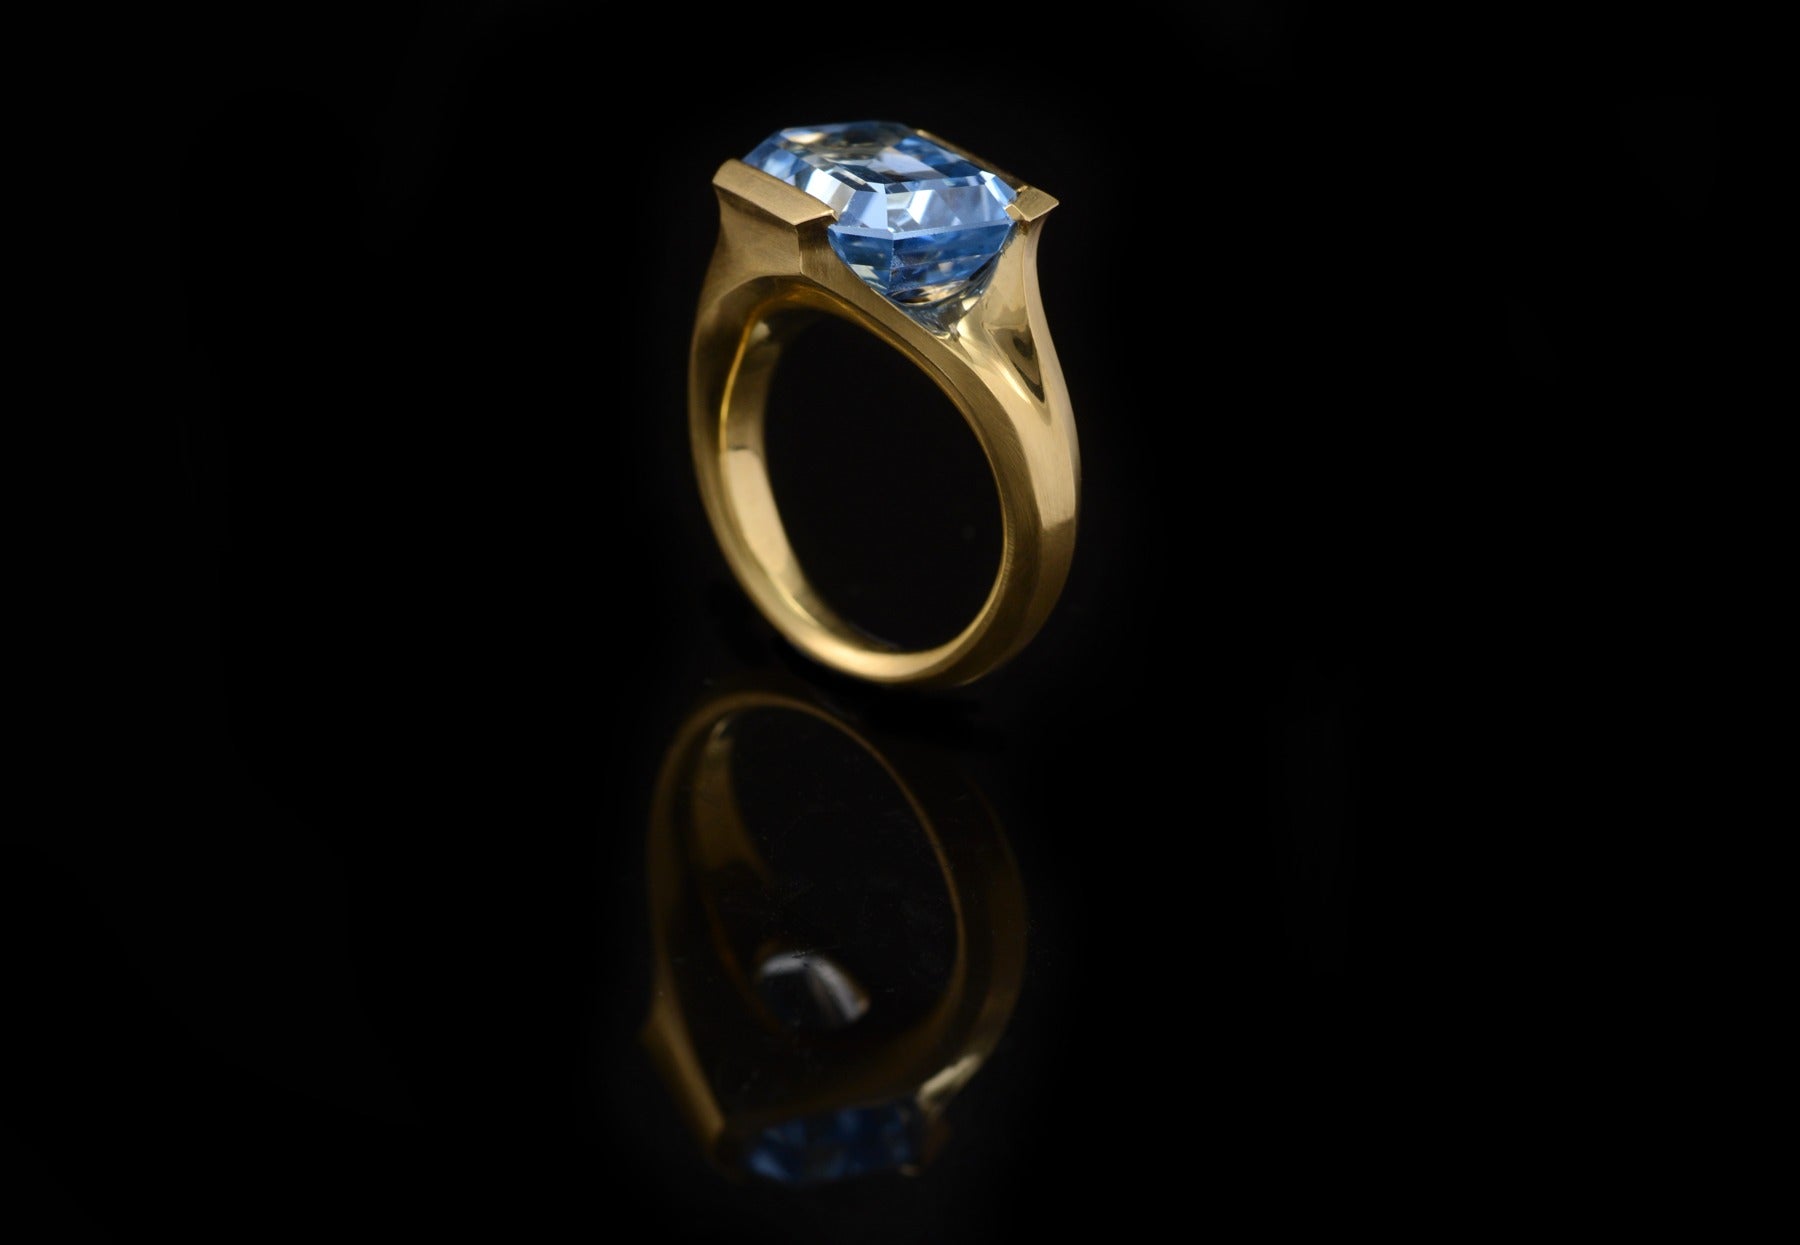 Hand carved gold ring with rectangular stone